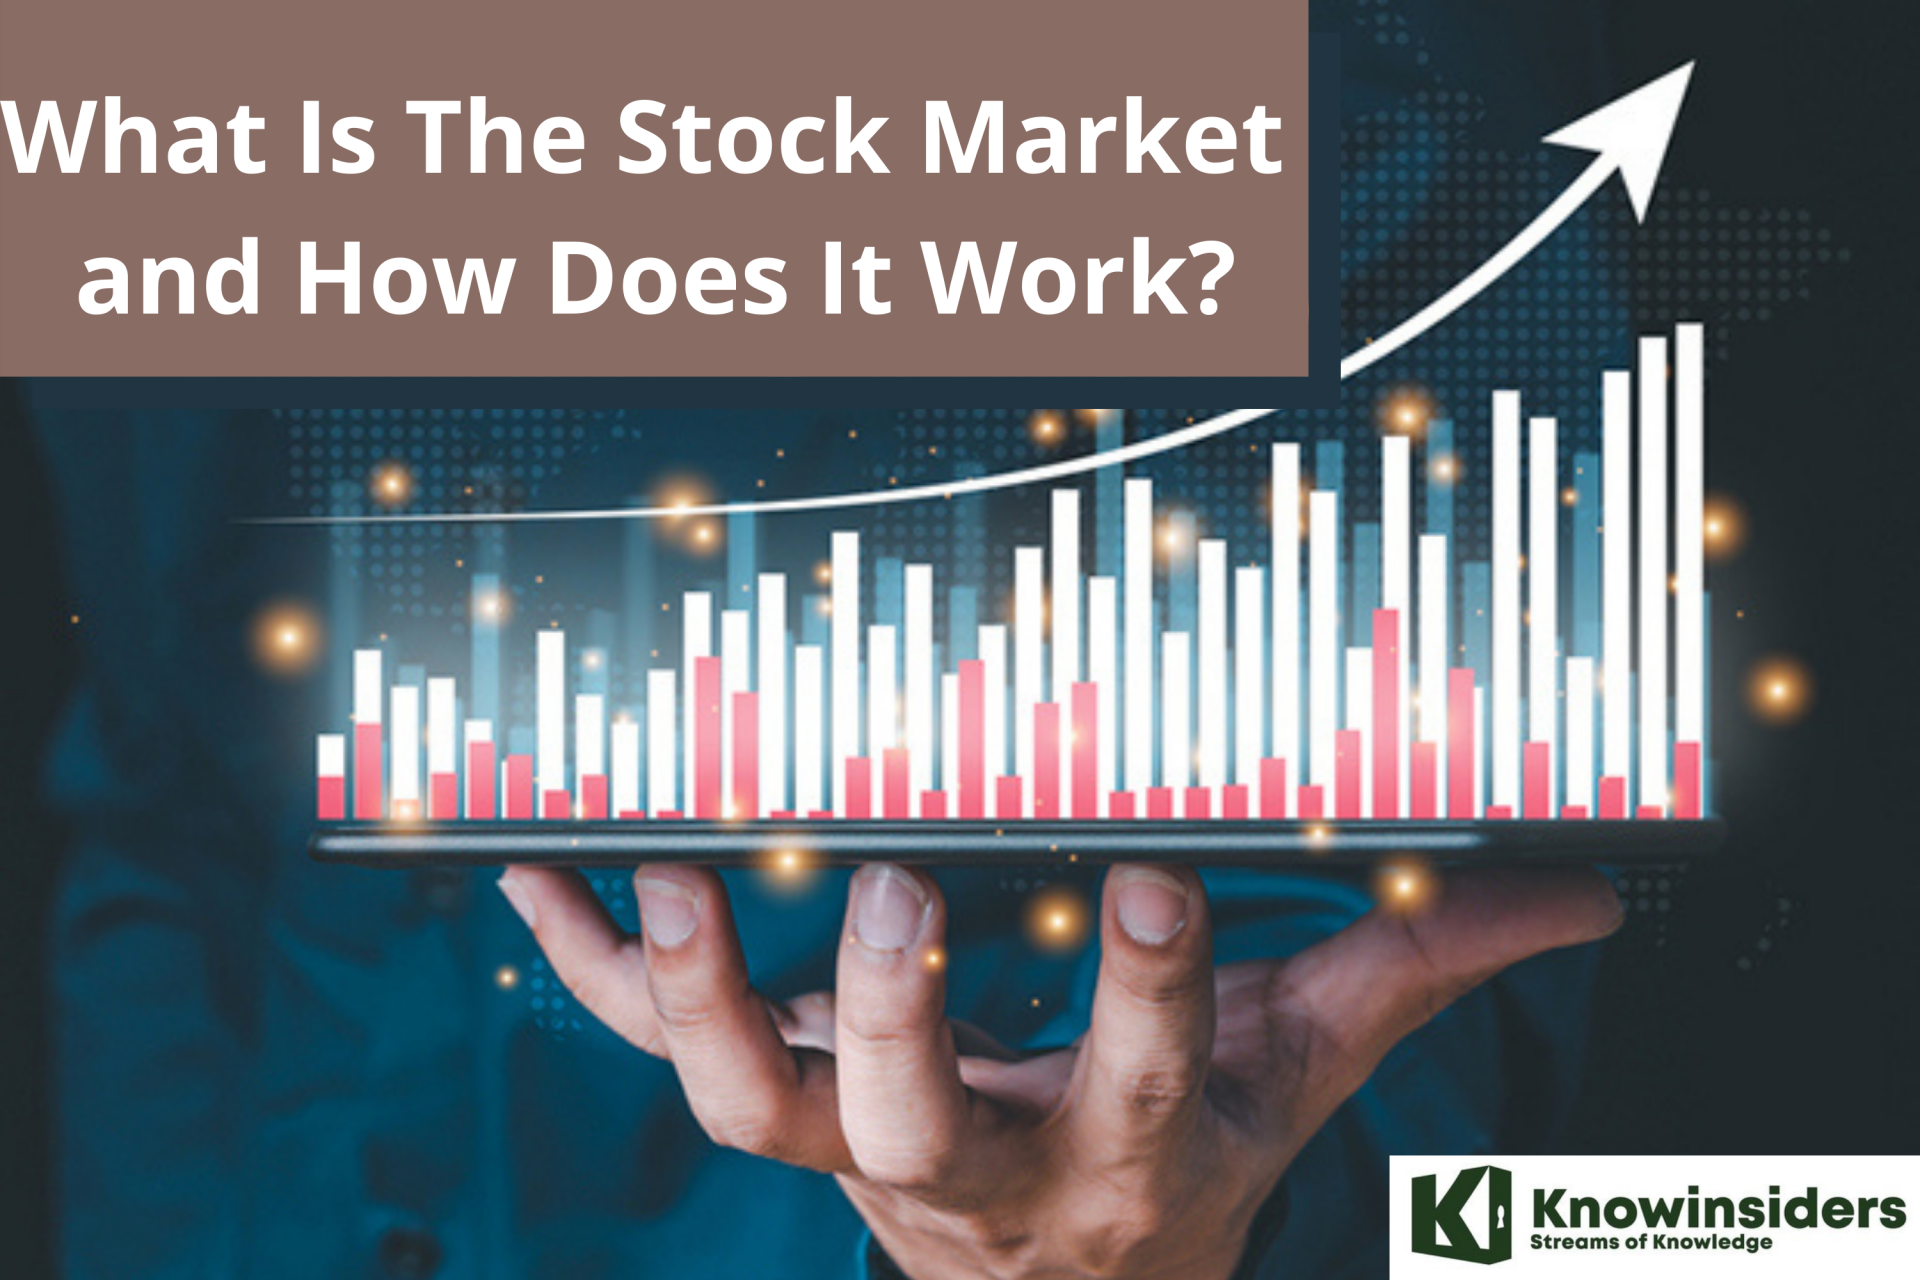 What is the stock market and how does it operate? Its types, history, and other aspects